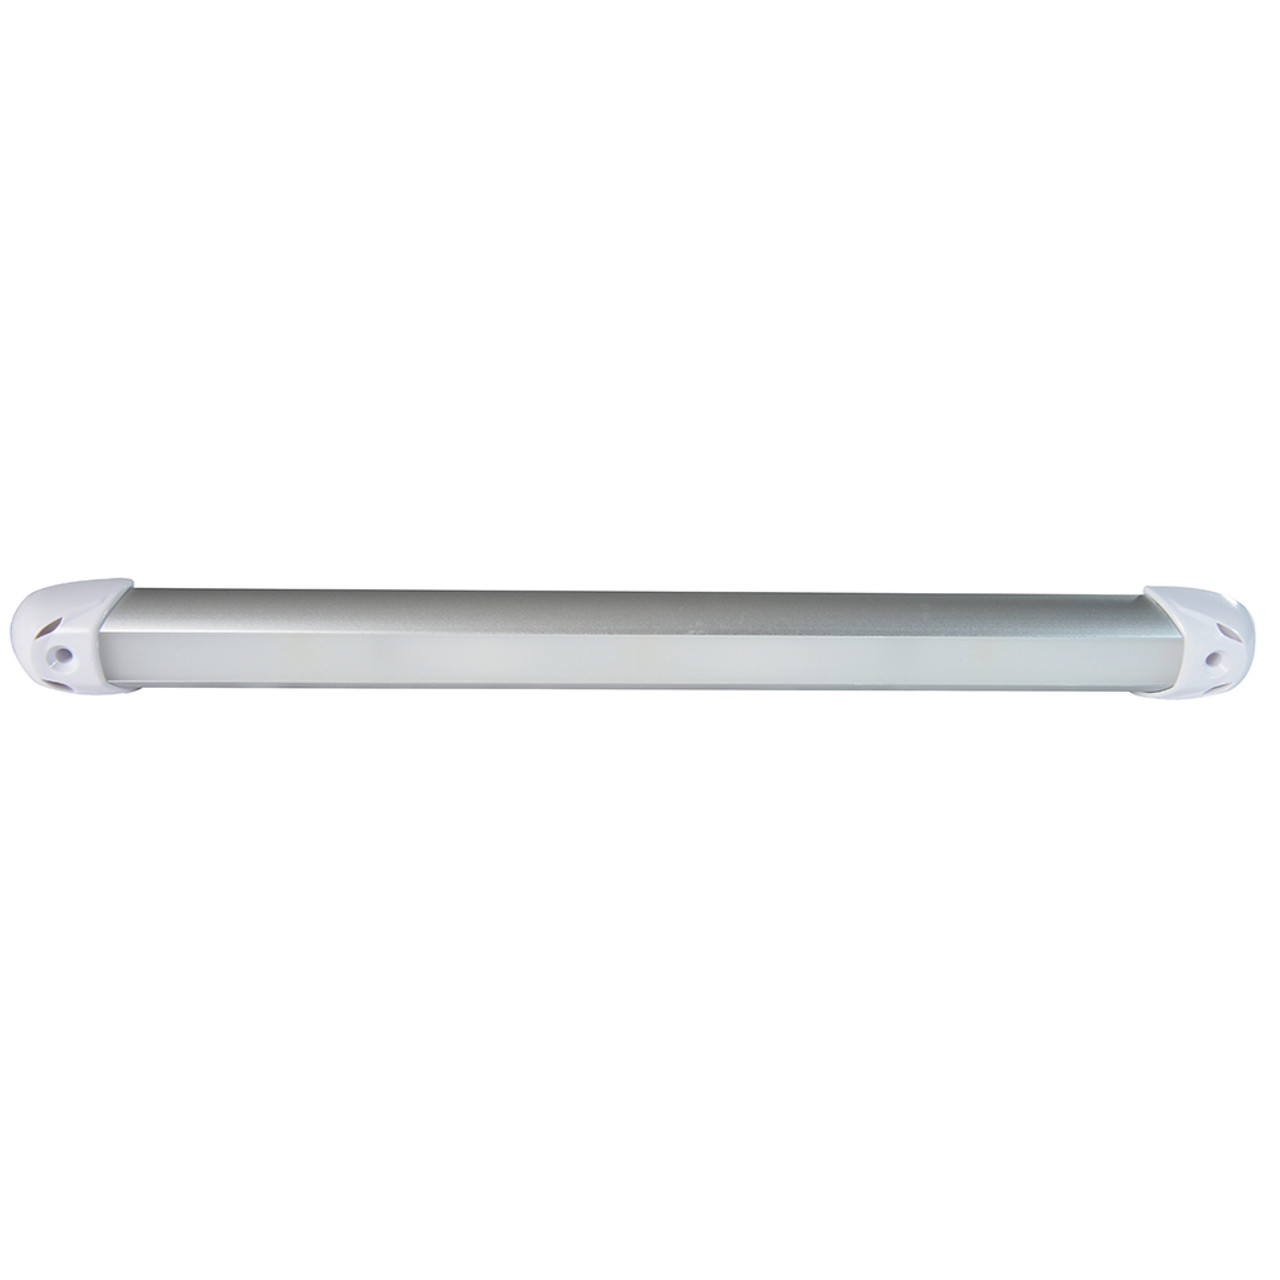 Lumitec Rail2 12" Light - 3-Color Blue\/Red Non Dimming w\/White Dimming [101243]